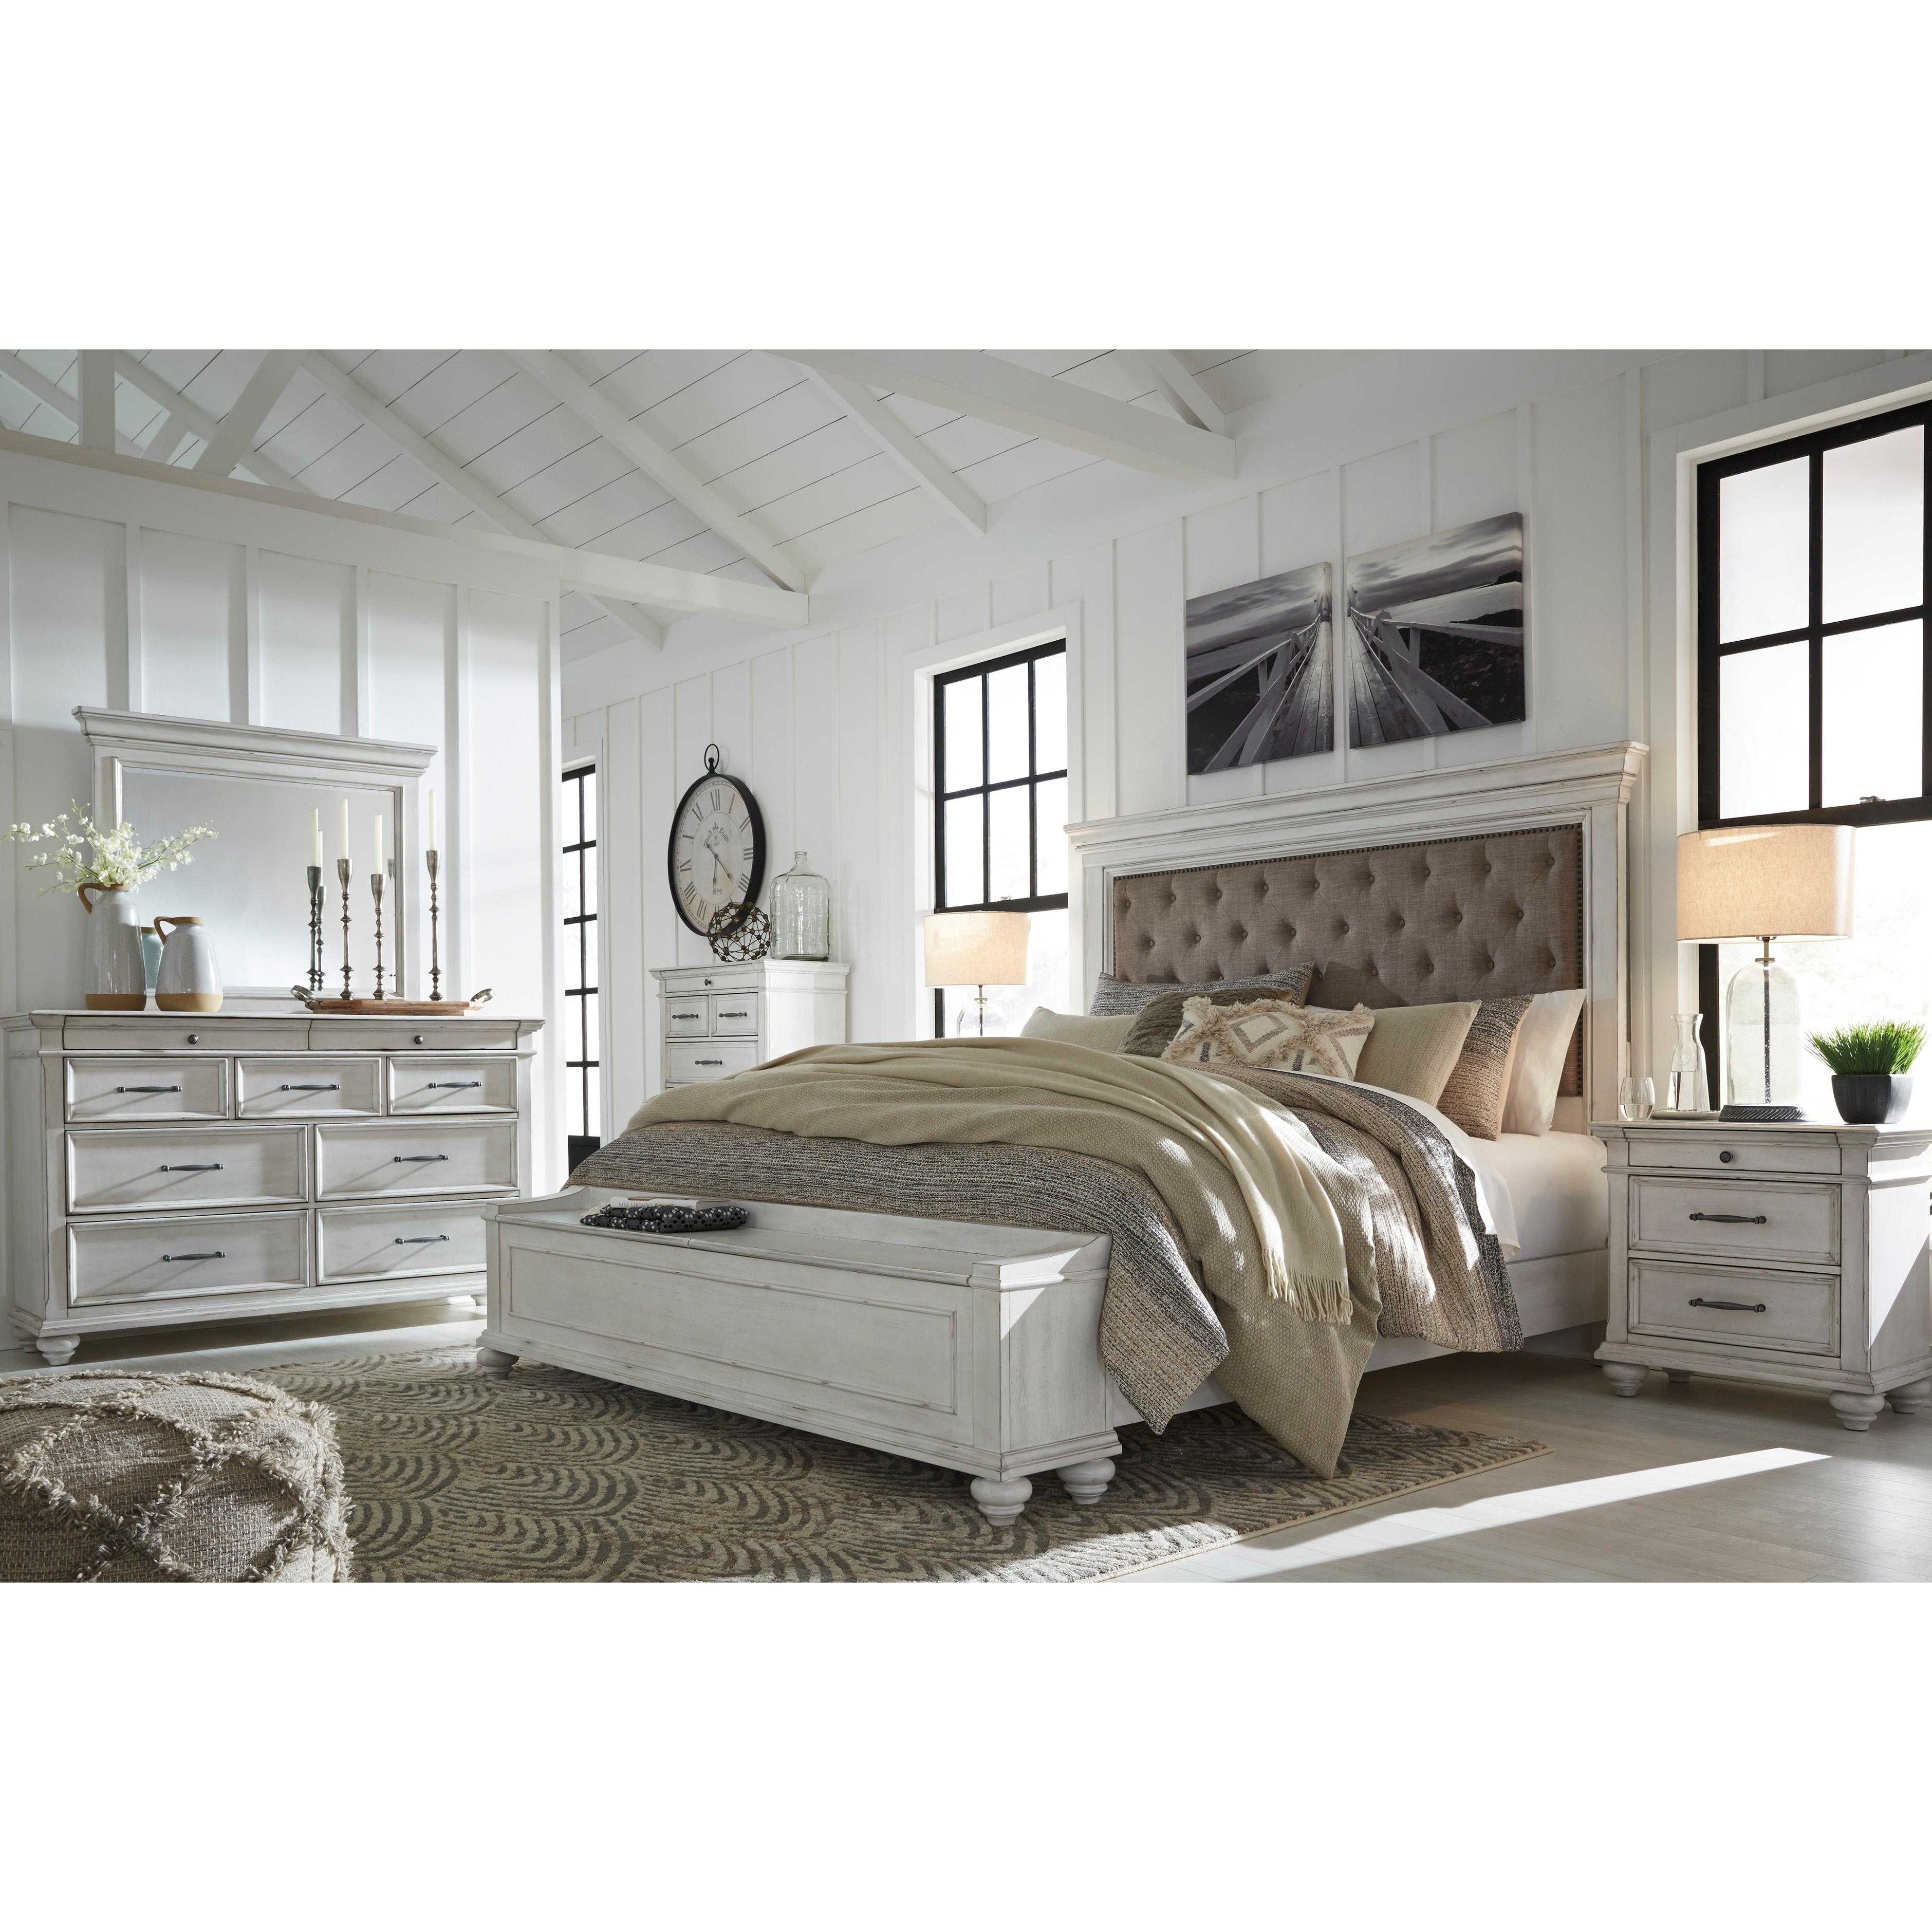 Benchcraft Kanwyn Queen Upholstered Panel Bed with Storage B777-157/B777-54S/B777-96